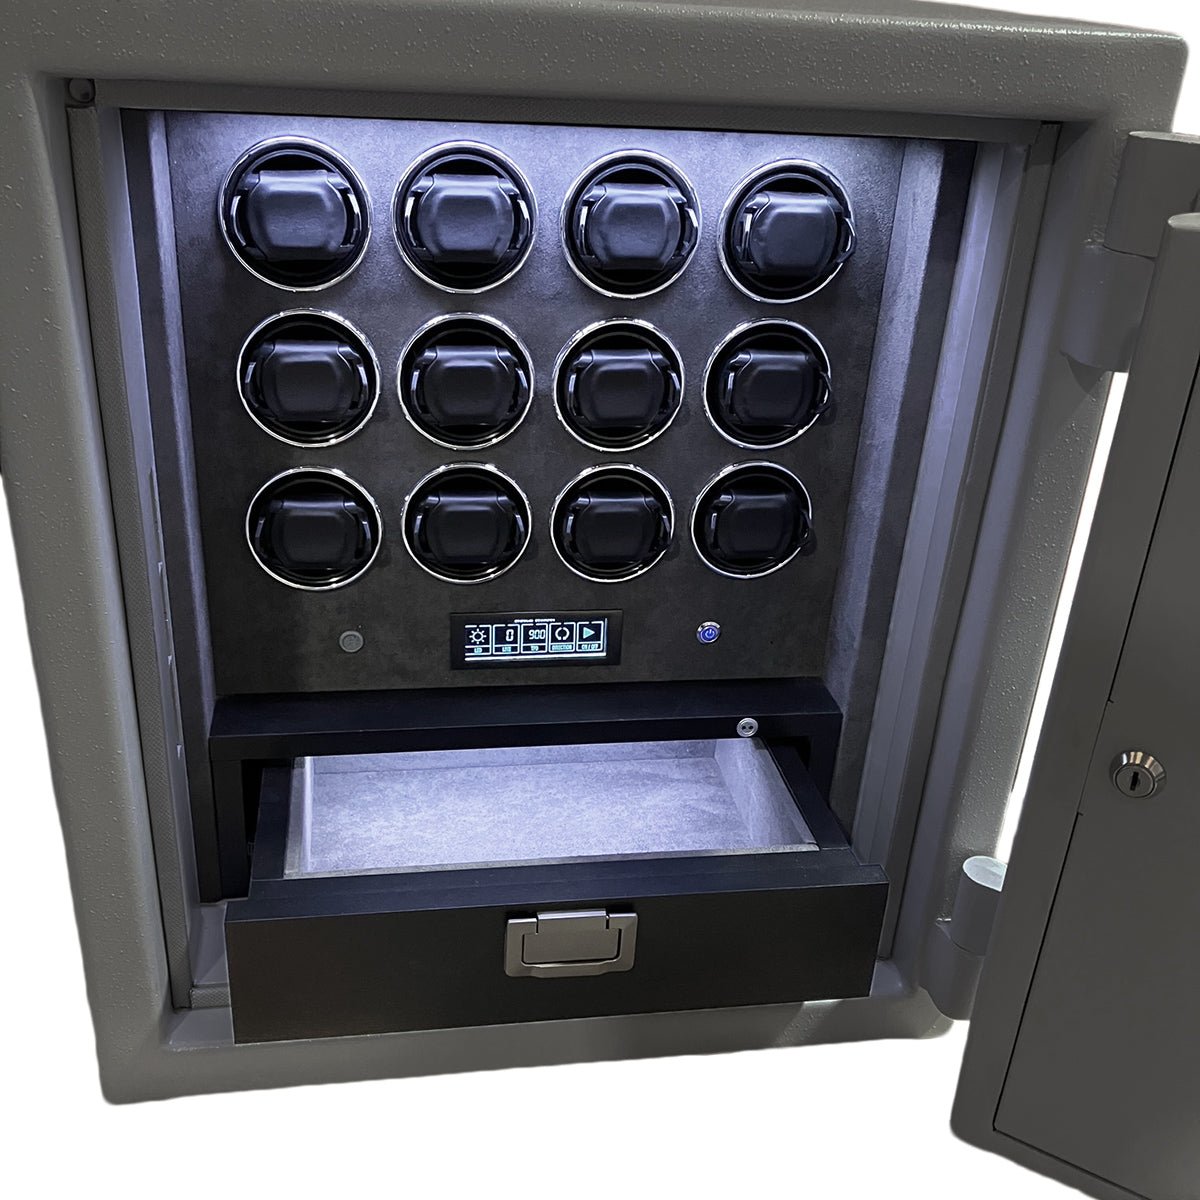 Grade 1 Watch Winder Safes with £100,000 Insurance Rating by Aevitas